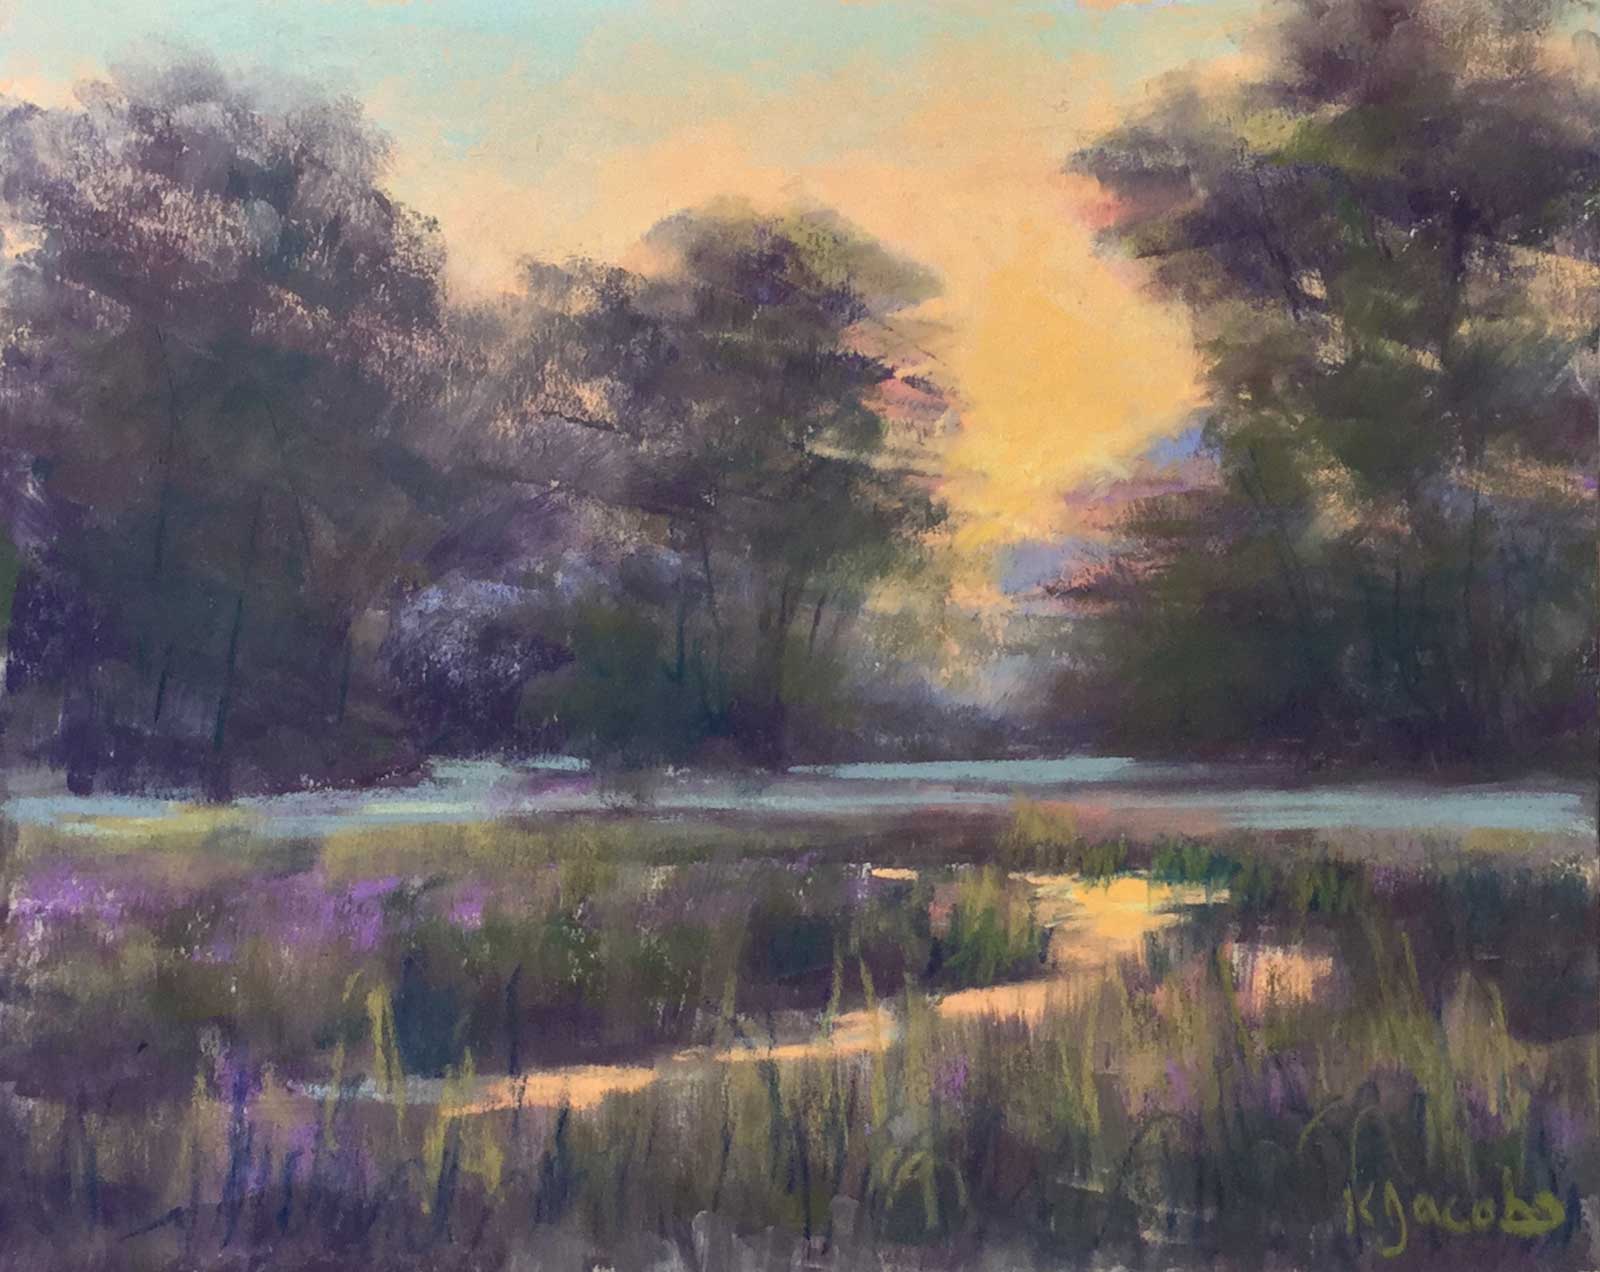 Kellie Jacobs, Early Morning Reflections, Pastel 8x10 $495